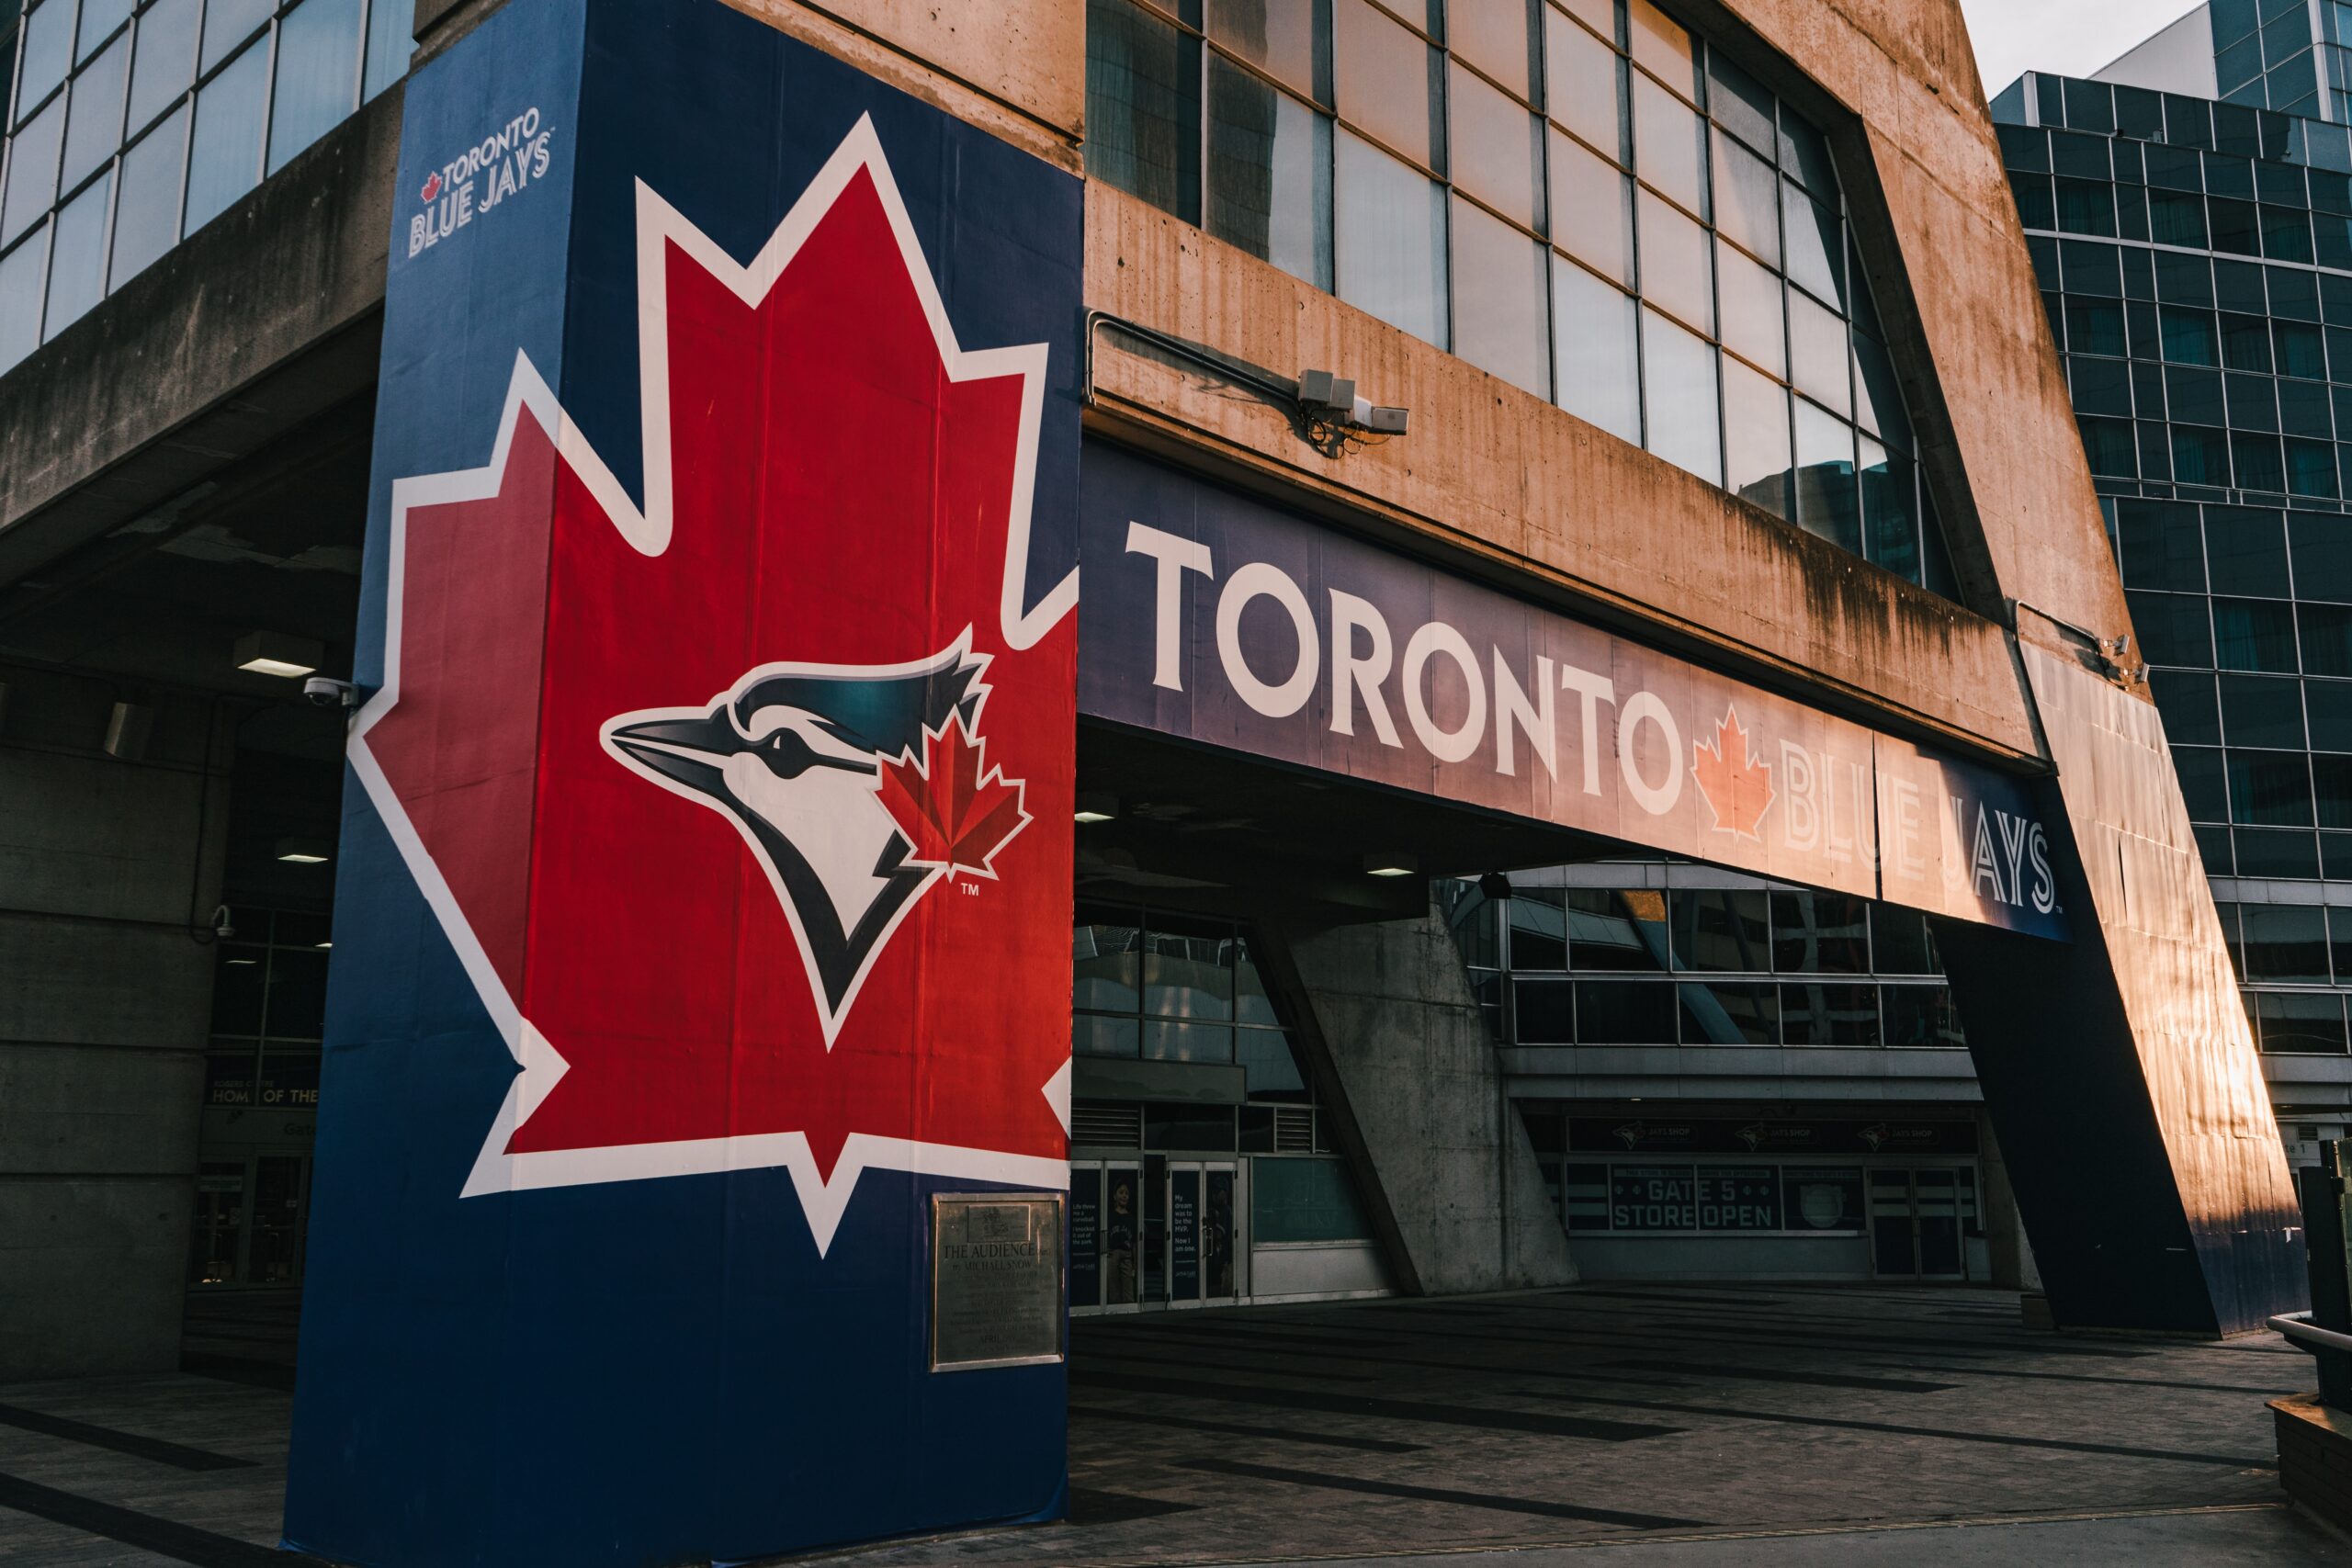 Will this Indian American Blue Jays draft pick play in the MLB